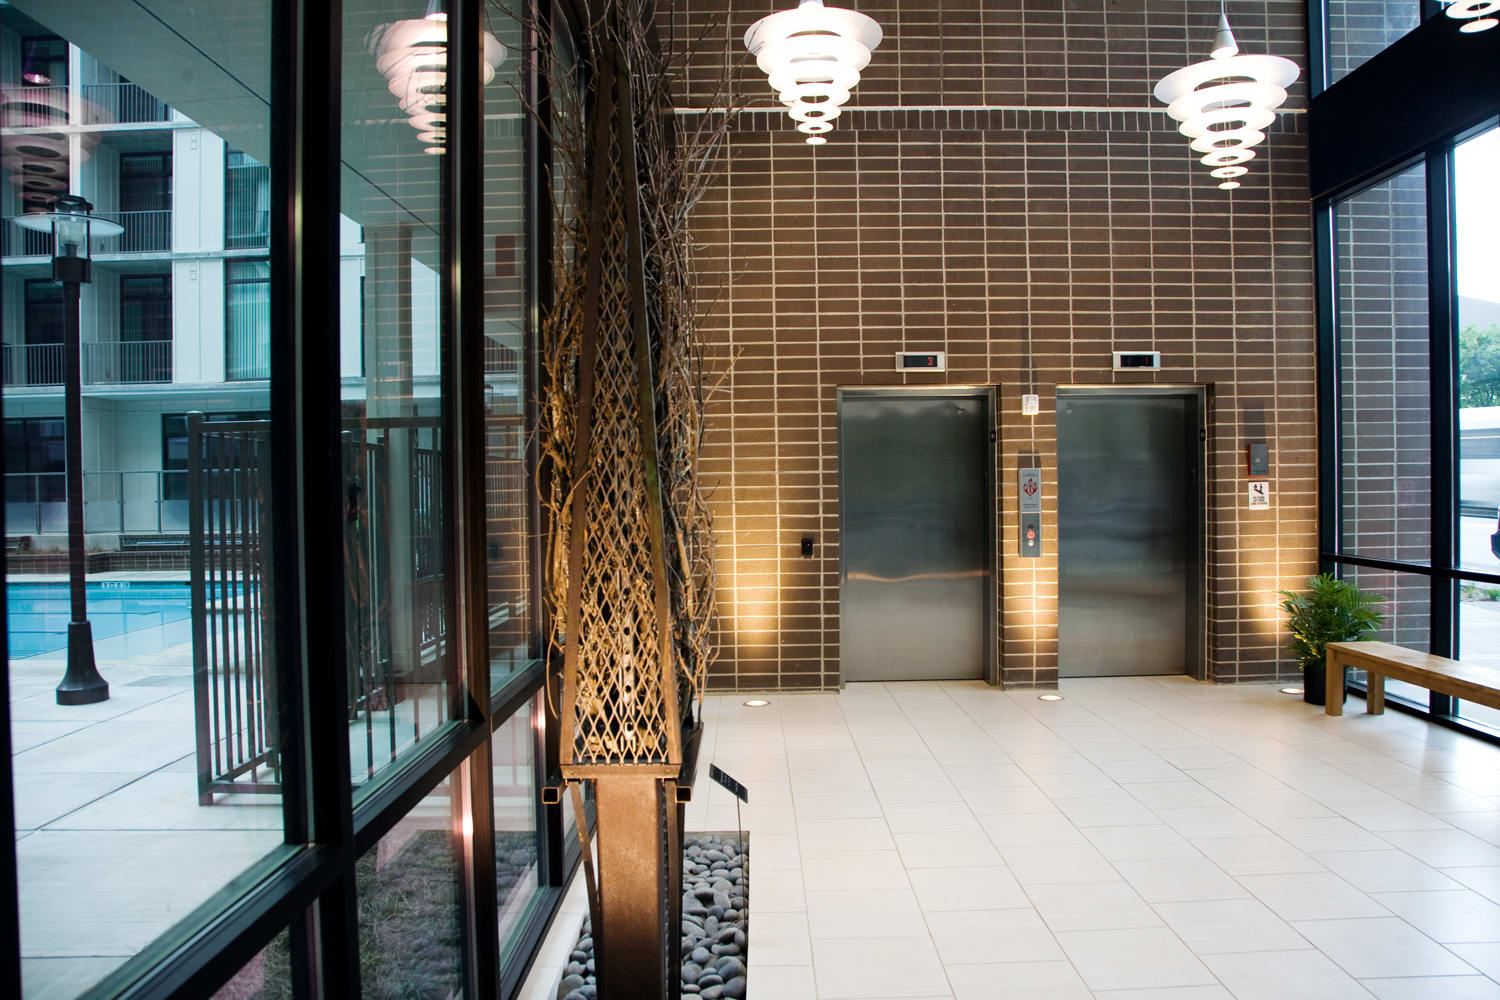 Enjoy the convivence of our elevators on your way home from a long day.